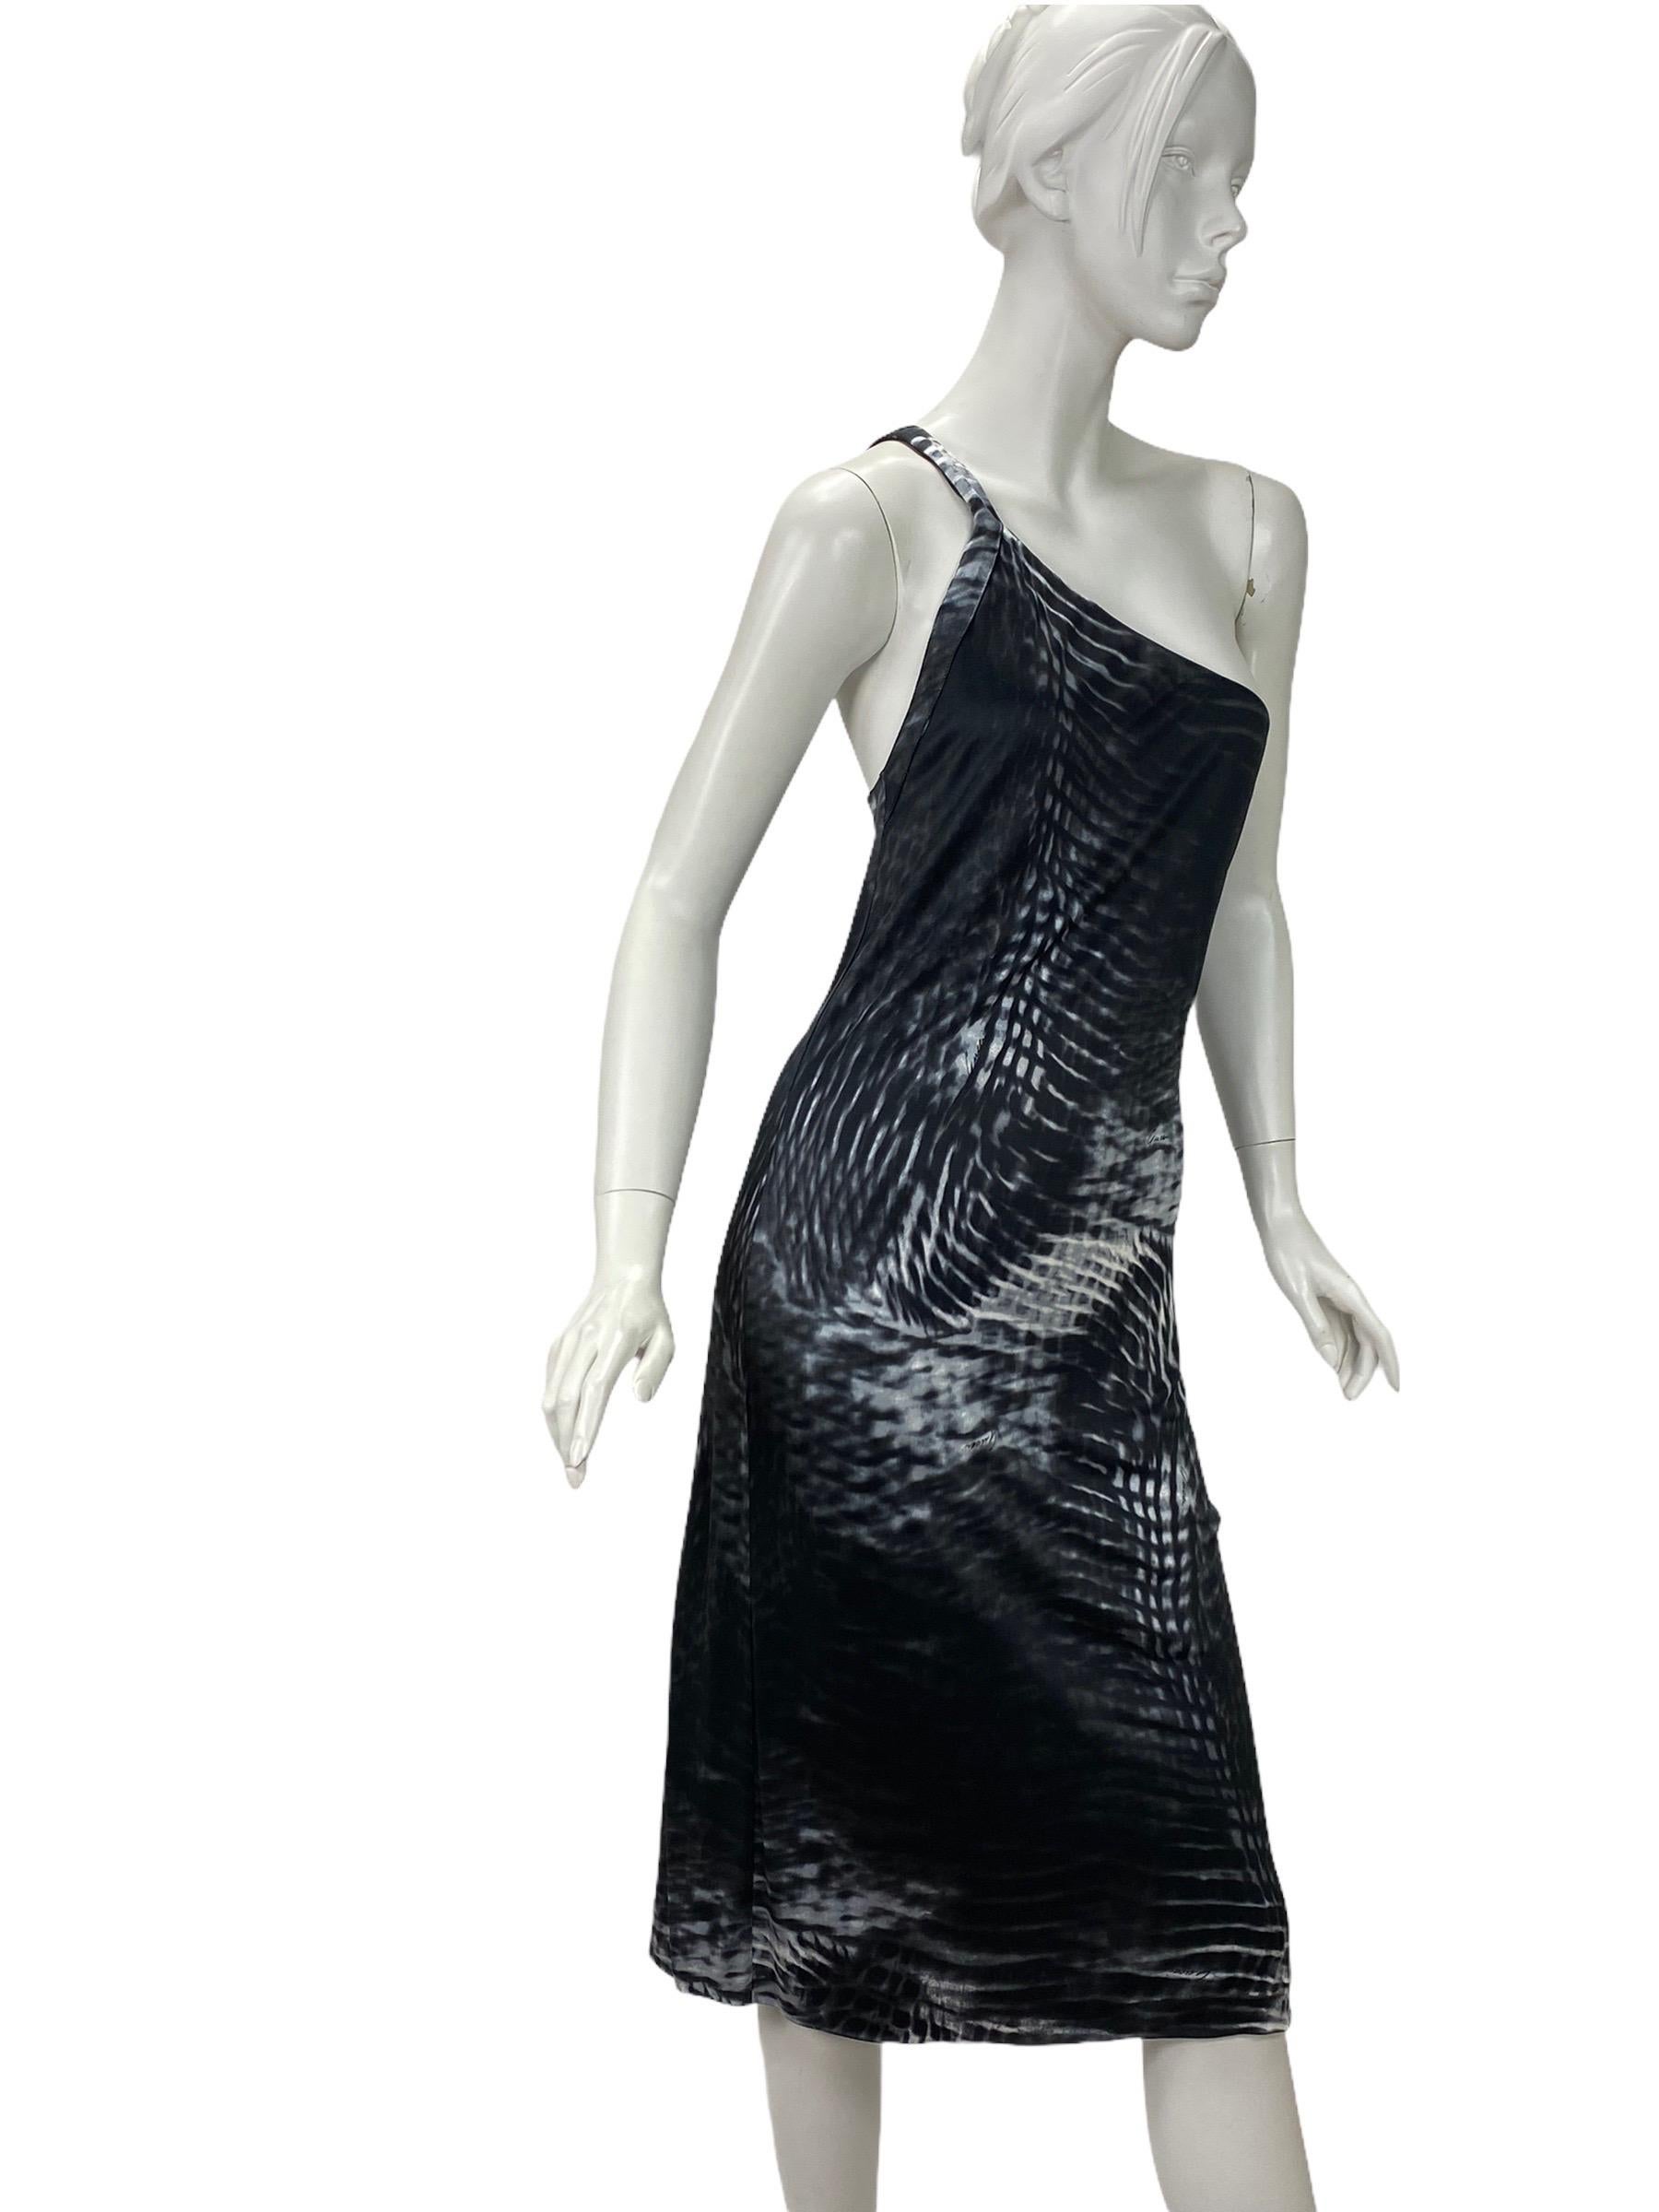 Tom Ford for Gucci dress
Spring/Summer 2000
One shoulder design, knee length, self lined.
IT Size 42 - US 6/8
Jersey has a lot of stretch. Total length is 44